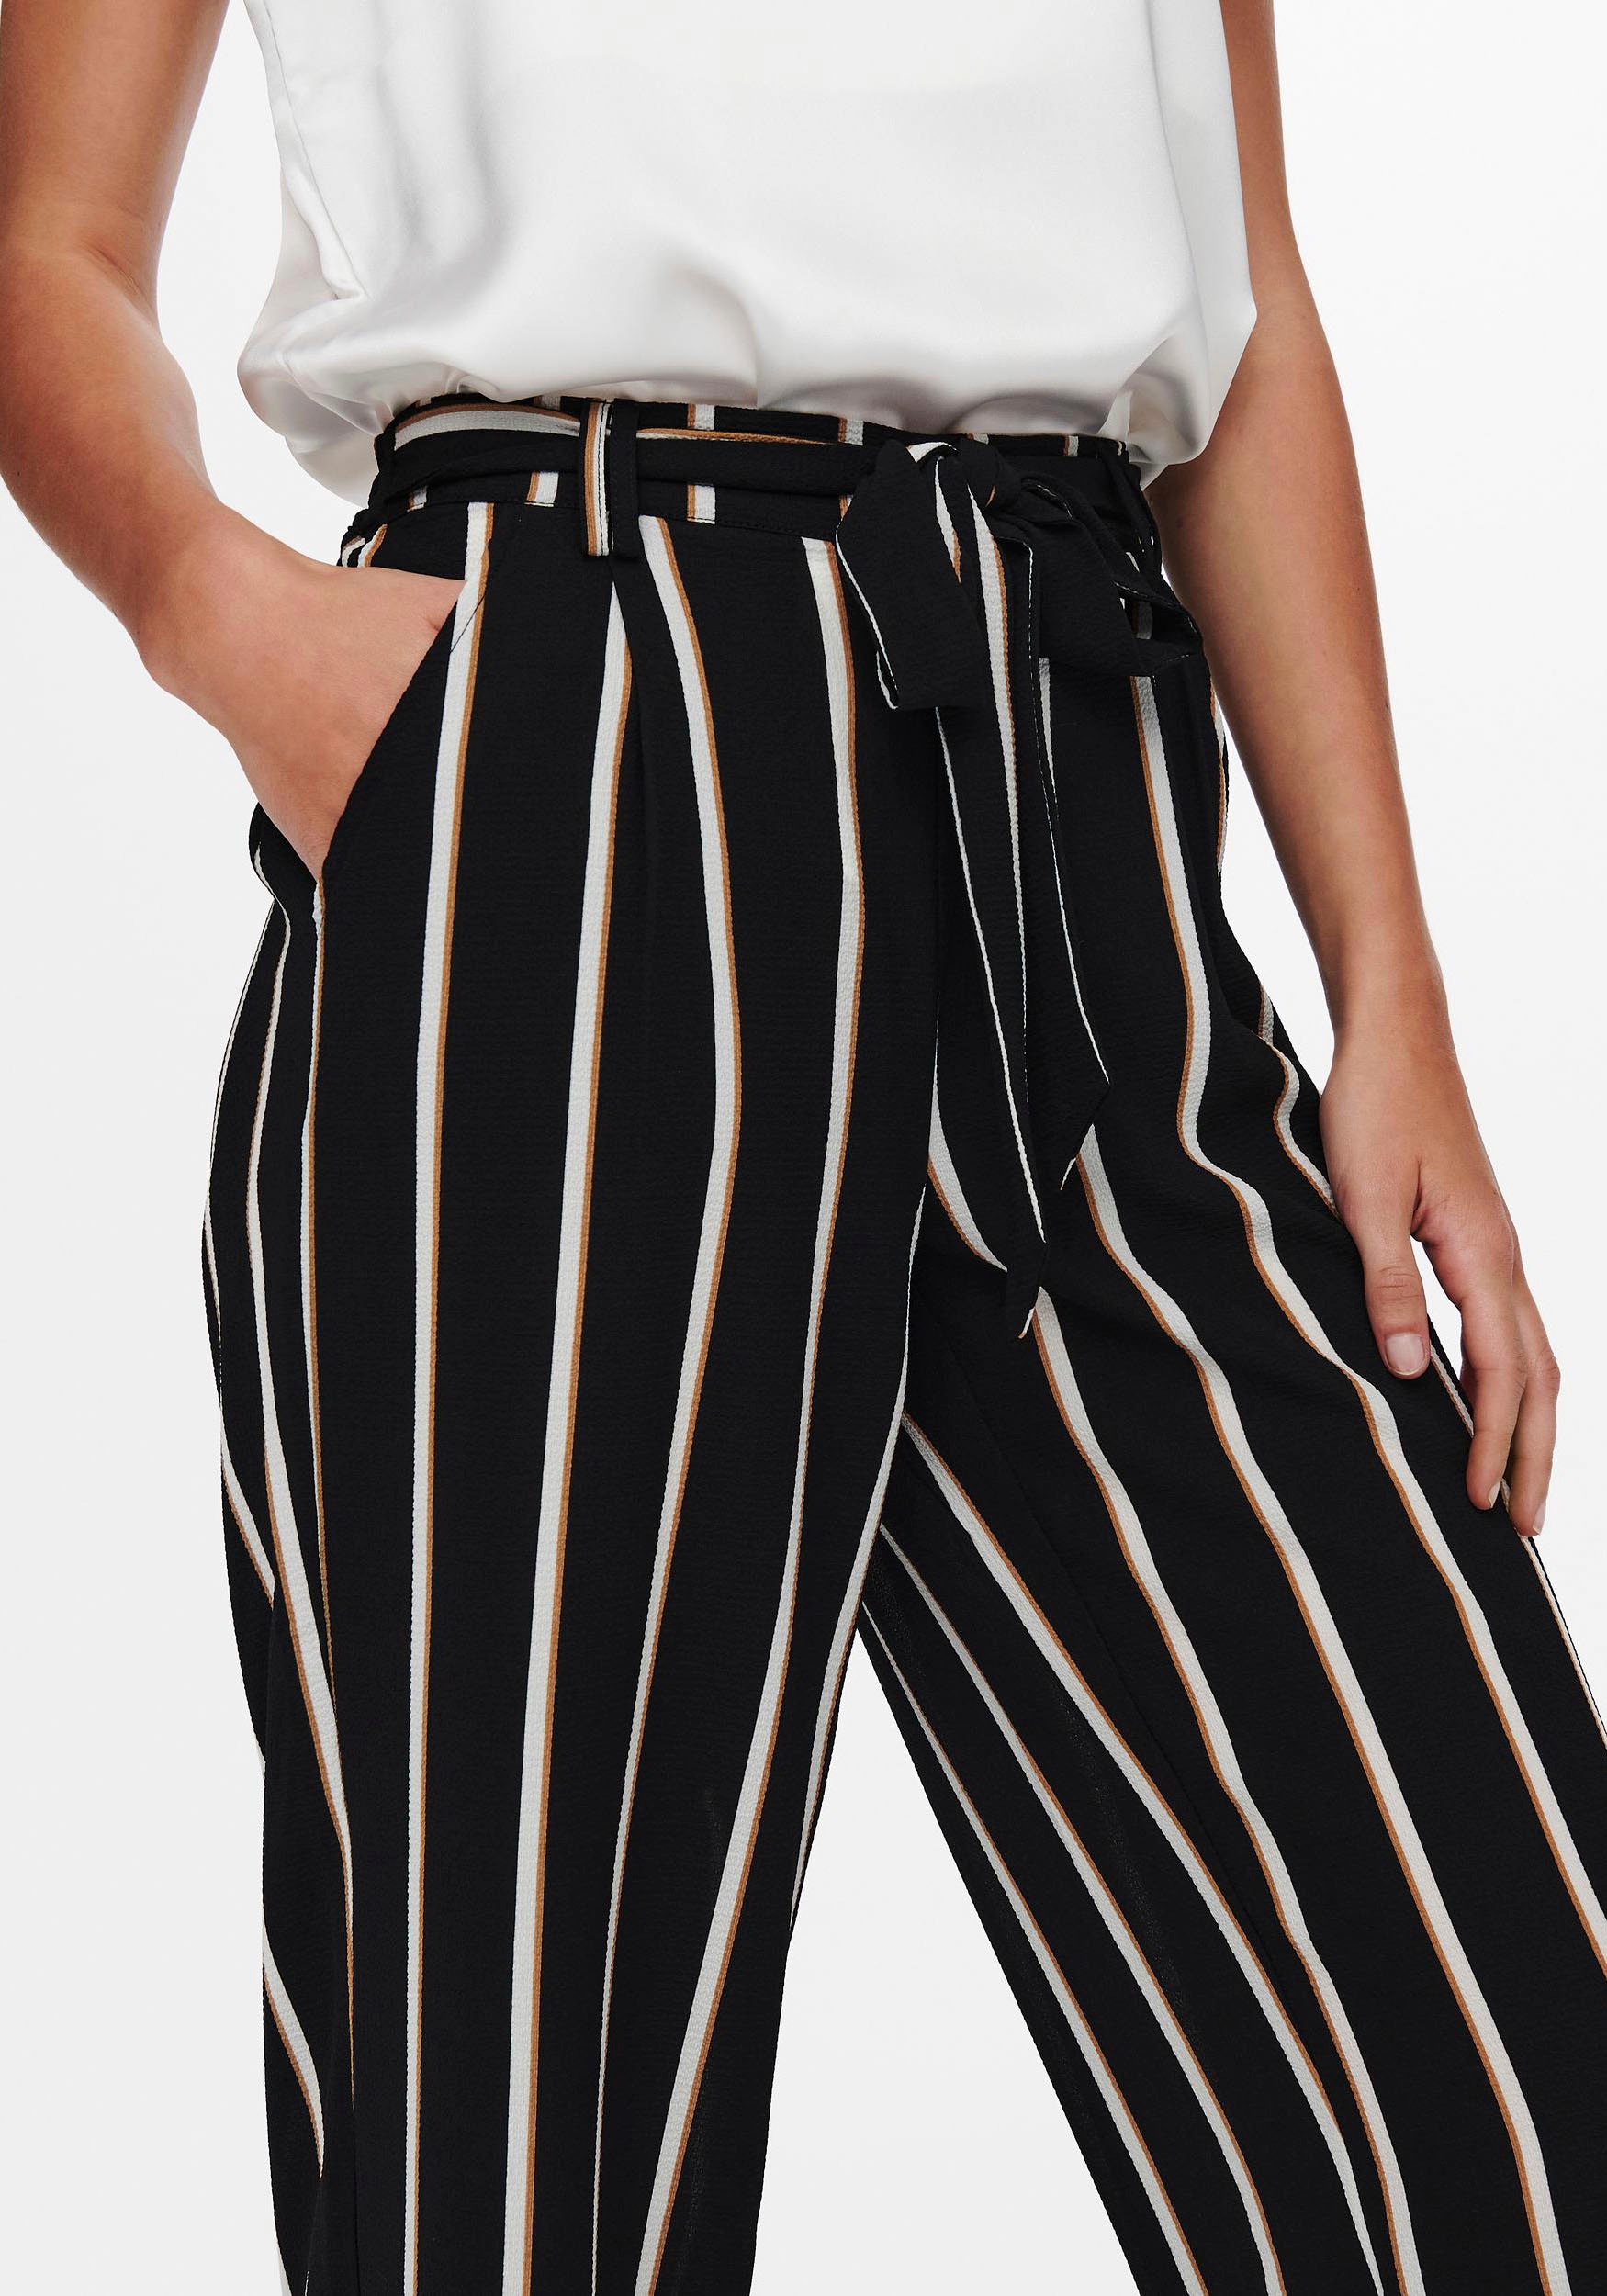 oder PALAZZO Palazzohose uni PTM«, gestreiftem PANT Design bei »ONLWINNER OTTO in CULOTTE ONLY NOOS